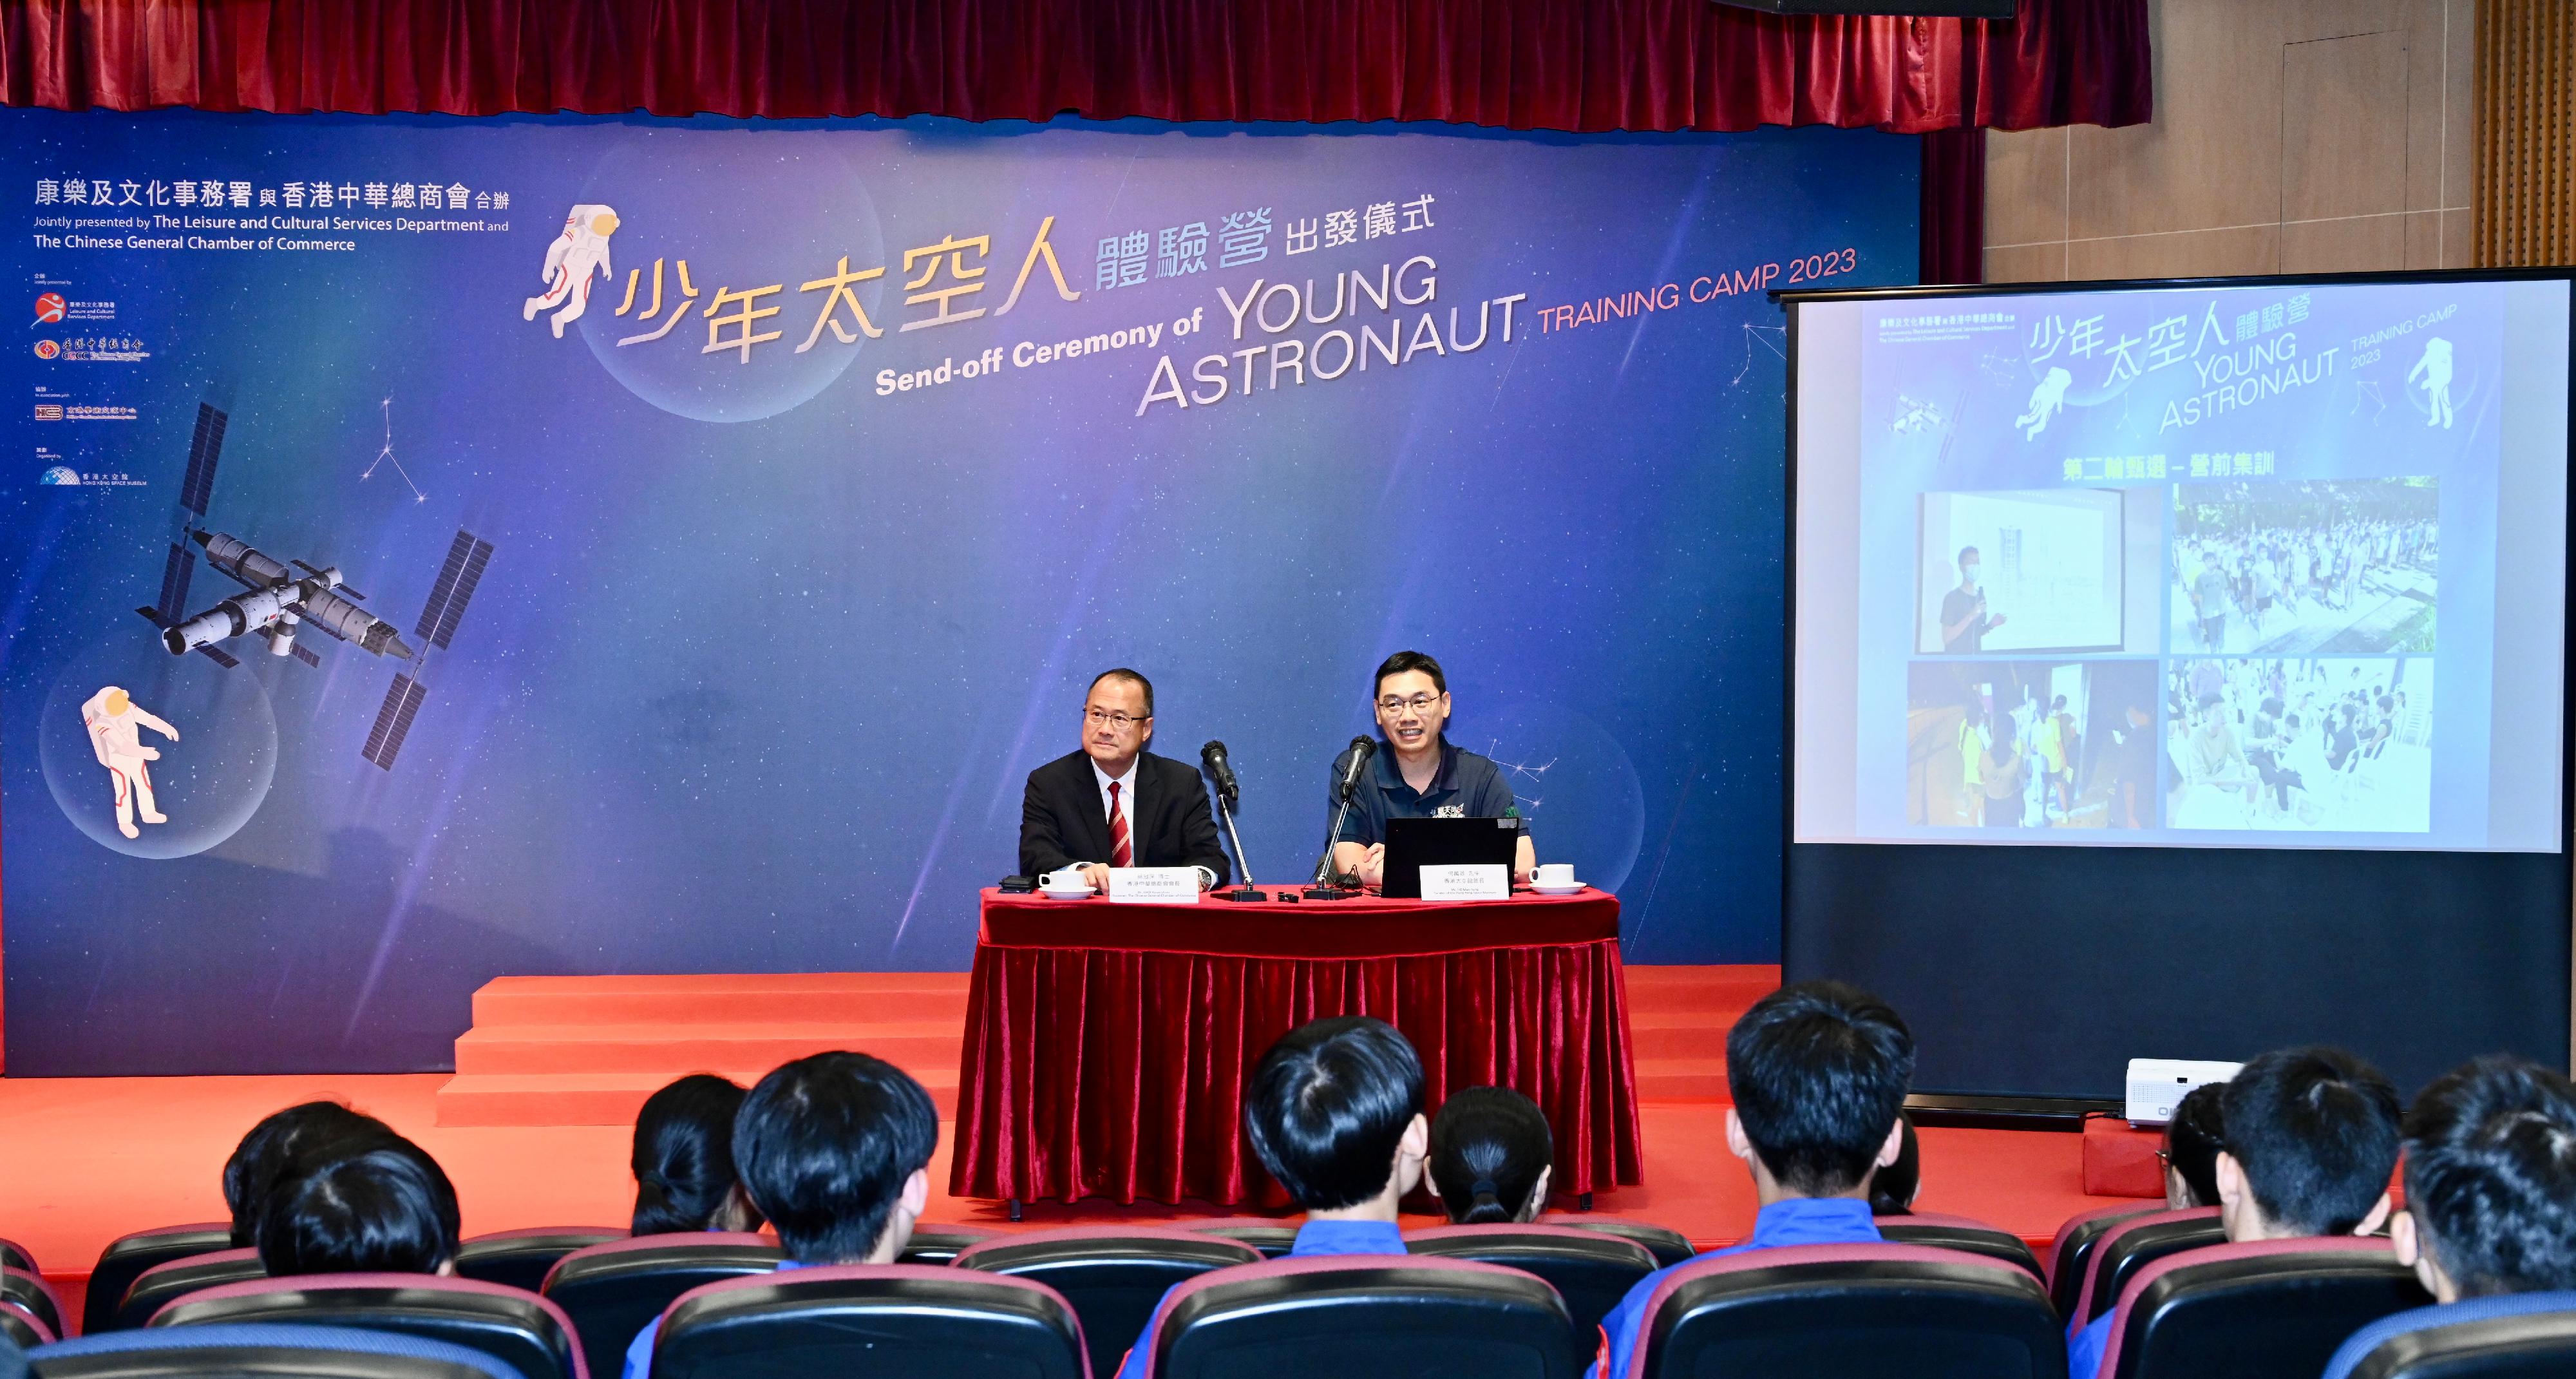 A send-off ceremony for the Young Astronaut Training Camp 2023 was held at the Hong Kong Space Museum today (July 25). Photo shows the Chairman of the Chinese General Chamber of Commerce, Dr Jonathan Choi (left), and the Curator of the Hong Kong Space Museum, Mr Timothy Ho (right), introducing details about the training camp.